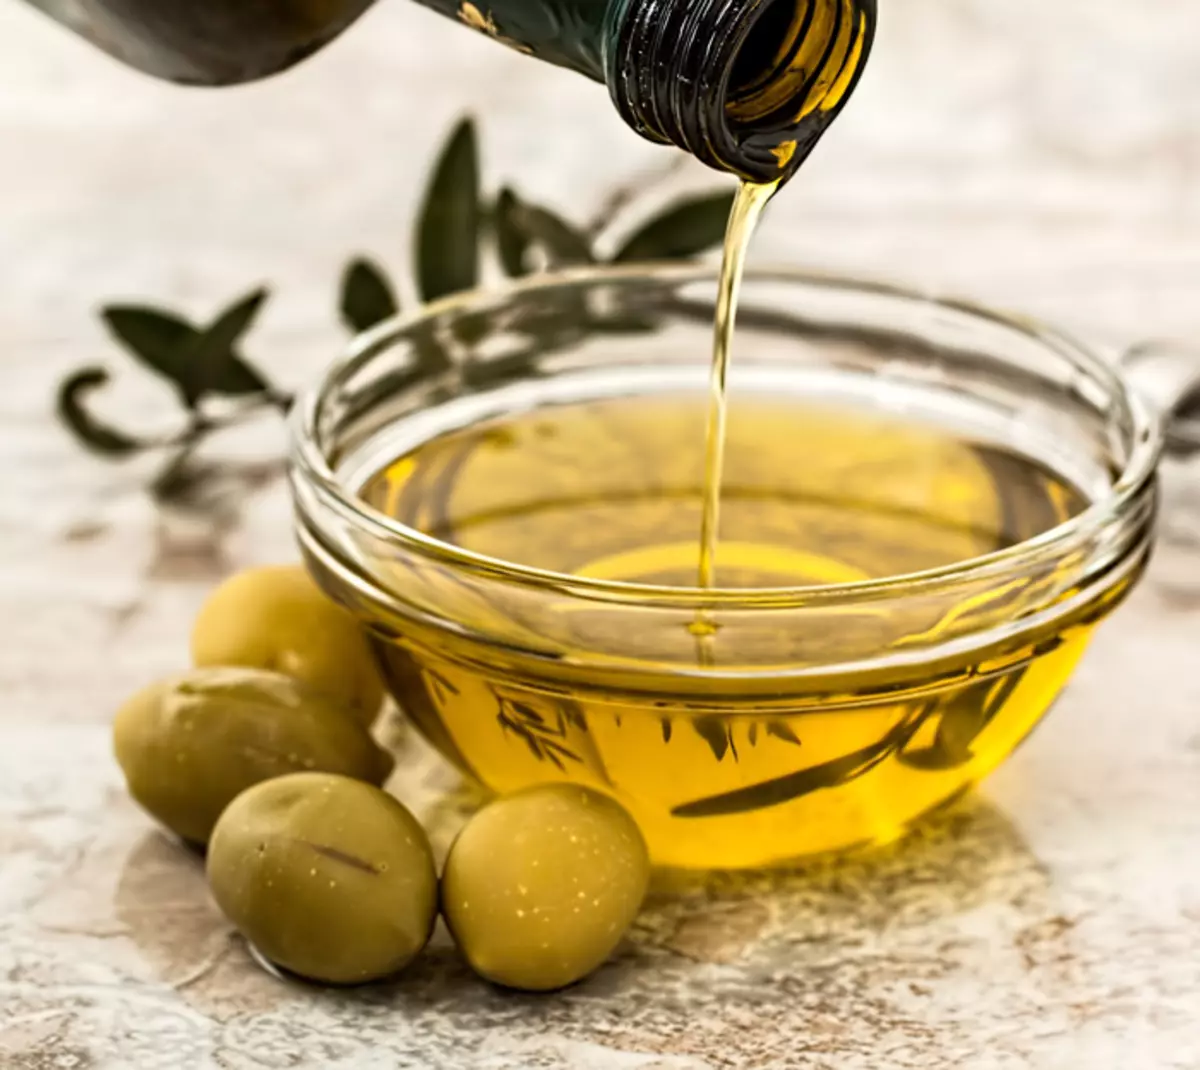 Olive oil nourishes and skin, and eyelashes